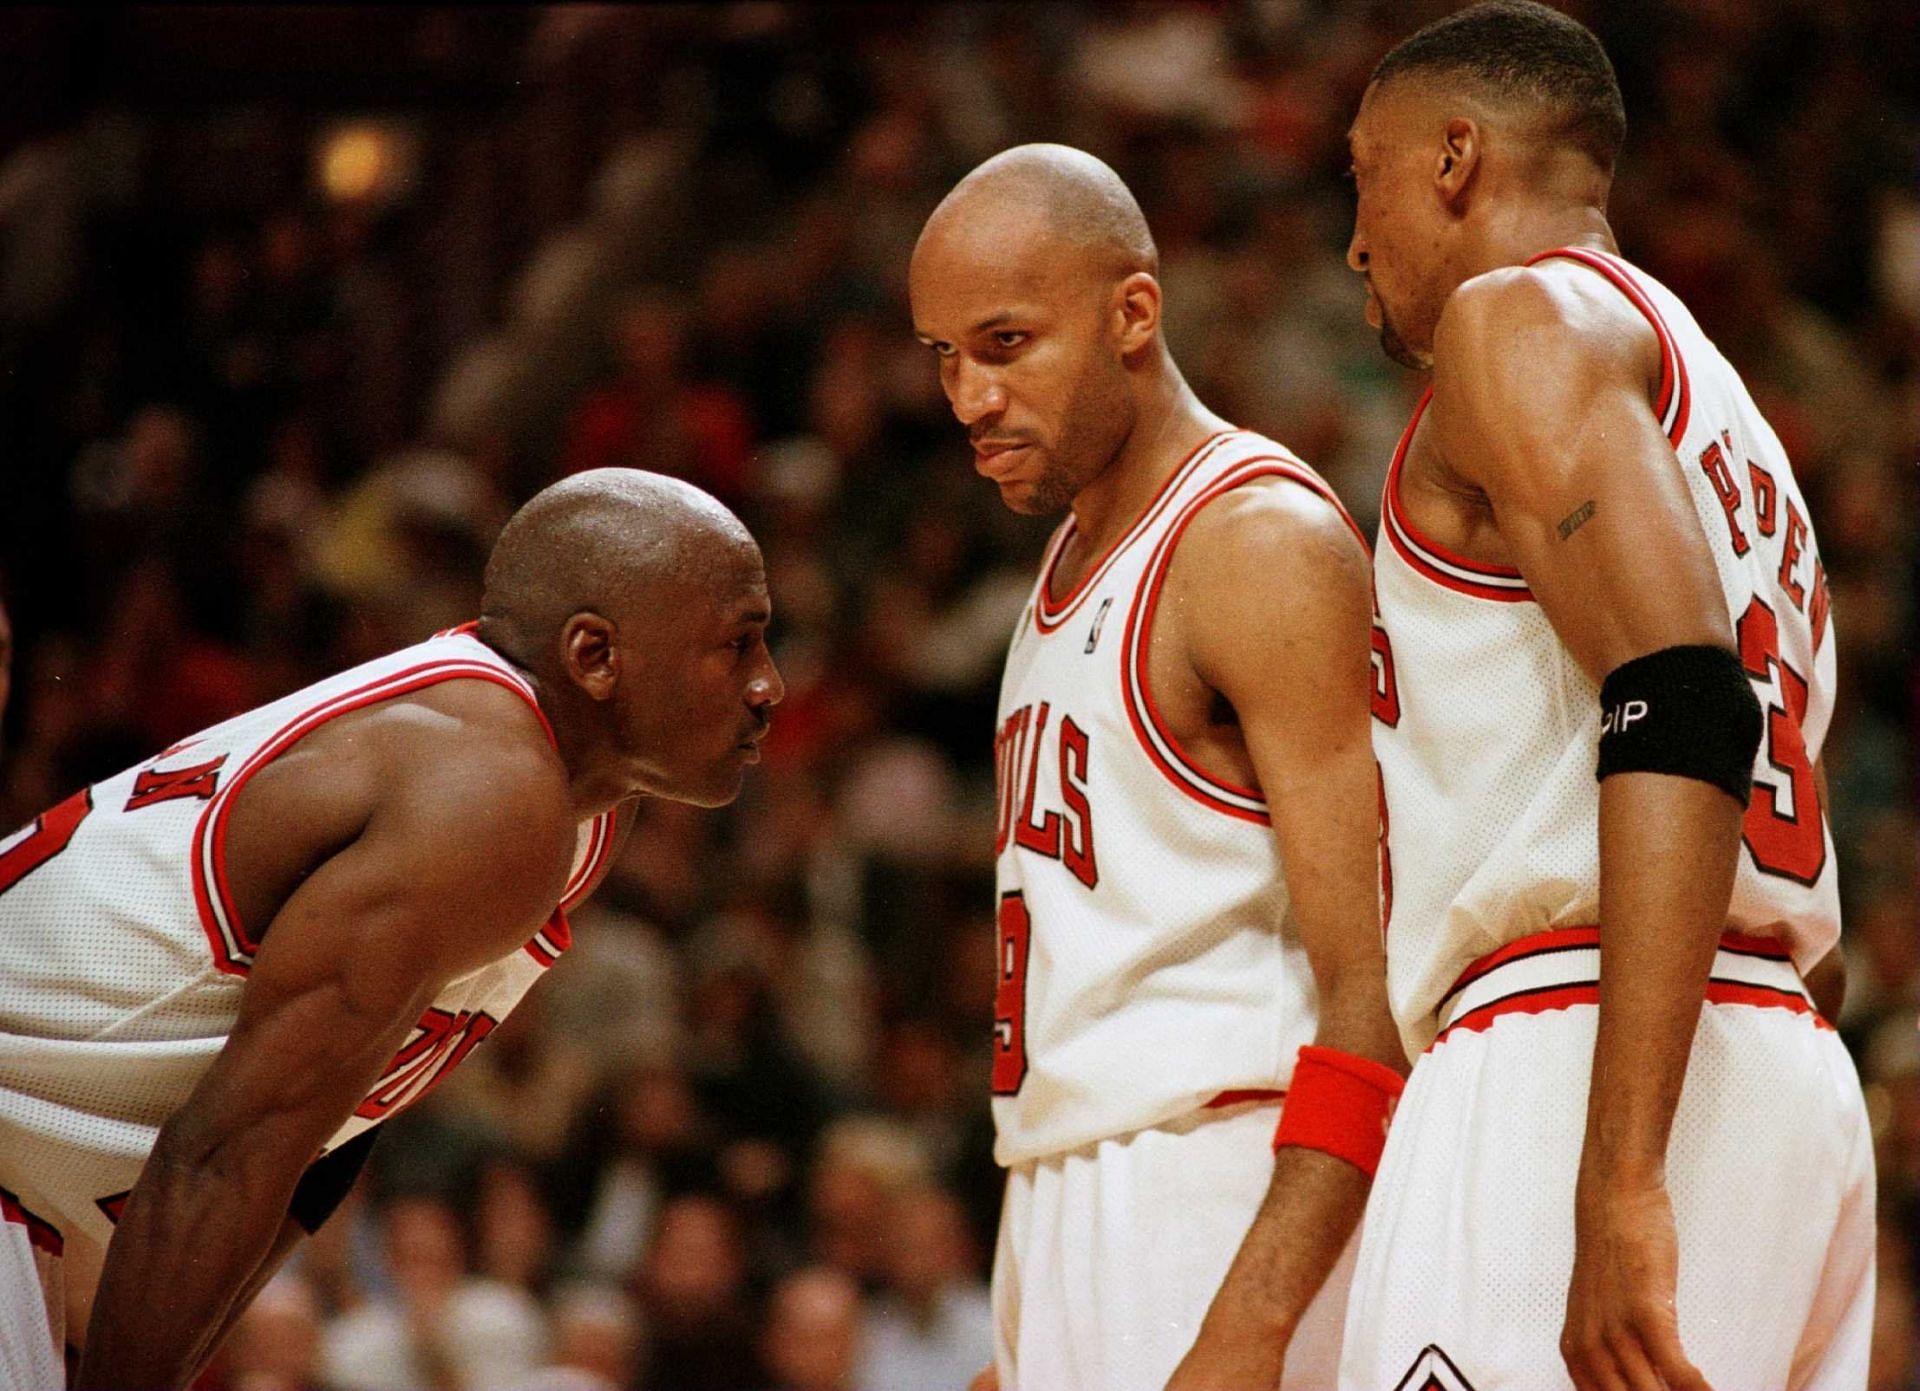 MJ, Ron Harper and Scottie Pippen in action against the Sonic